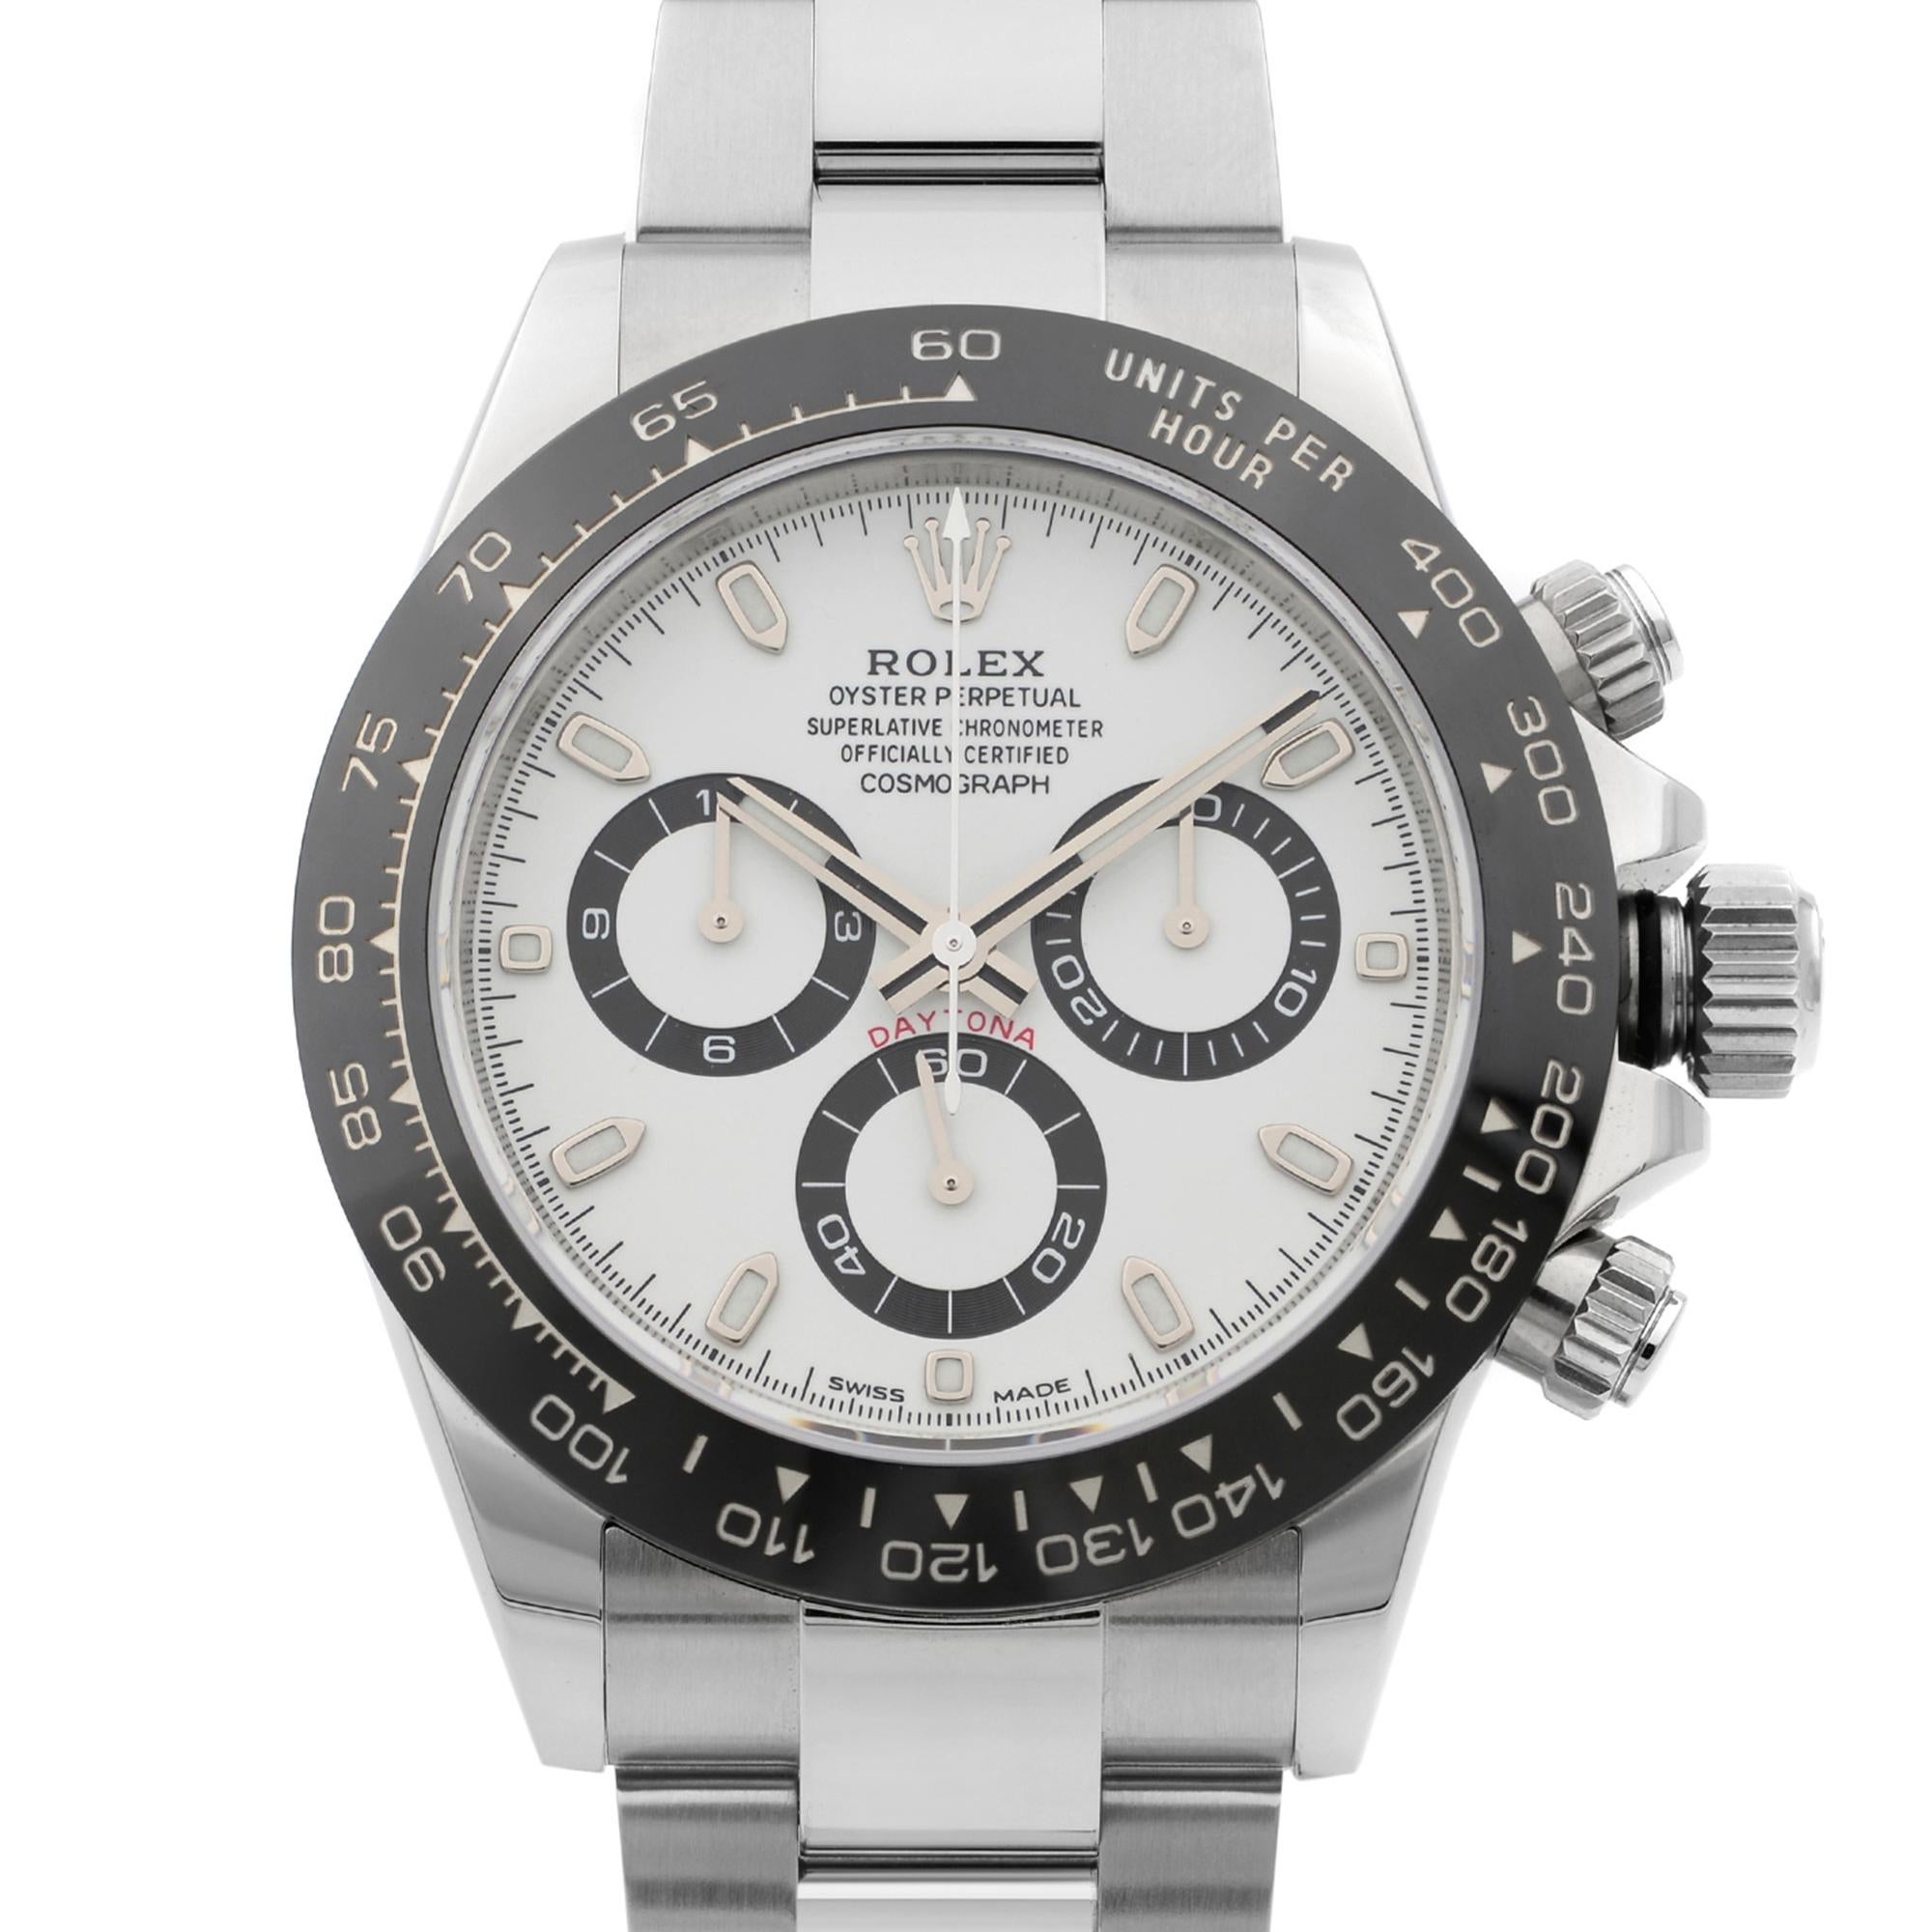 Pre-owned Like New Rolex Cosmograph Daytona Steel Ceramic Bezel White Dial Automatic Men's Watch. Comes with a 2020 Rolex Card. This Beautiful Timepiece Features: Stainless Steel Case and Rolex Oyster Bracelet, Fixed Black Monobloc Cerachrom Bezel